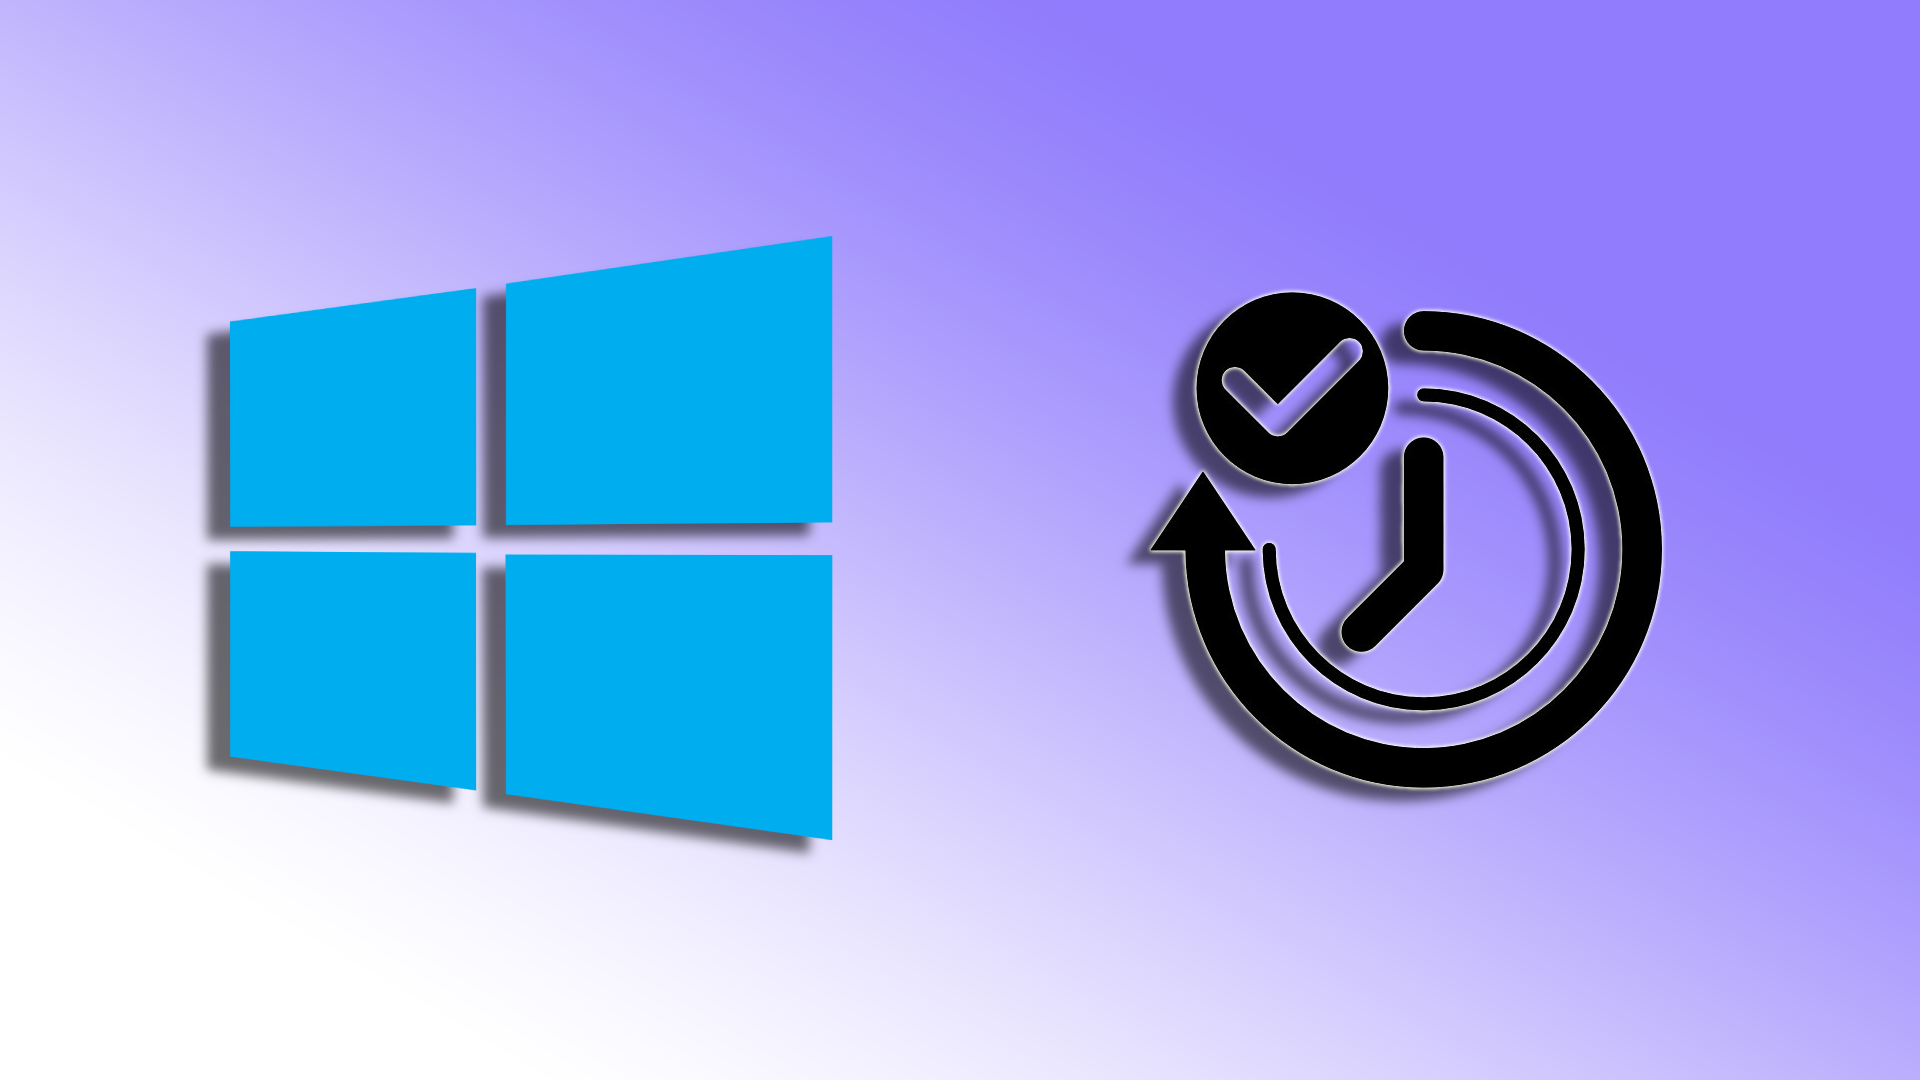 How to see system uptime in Windows